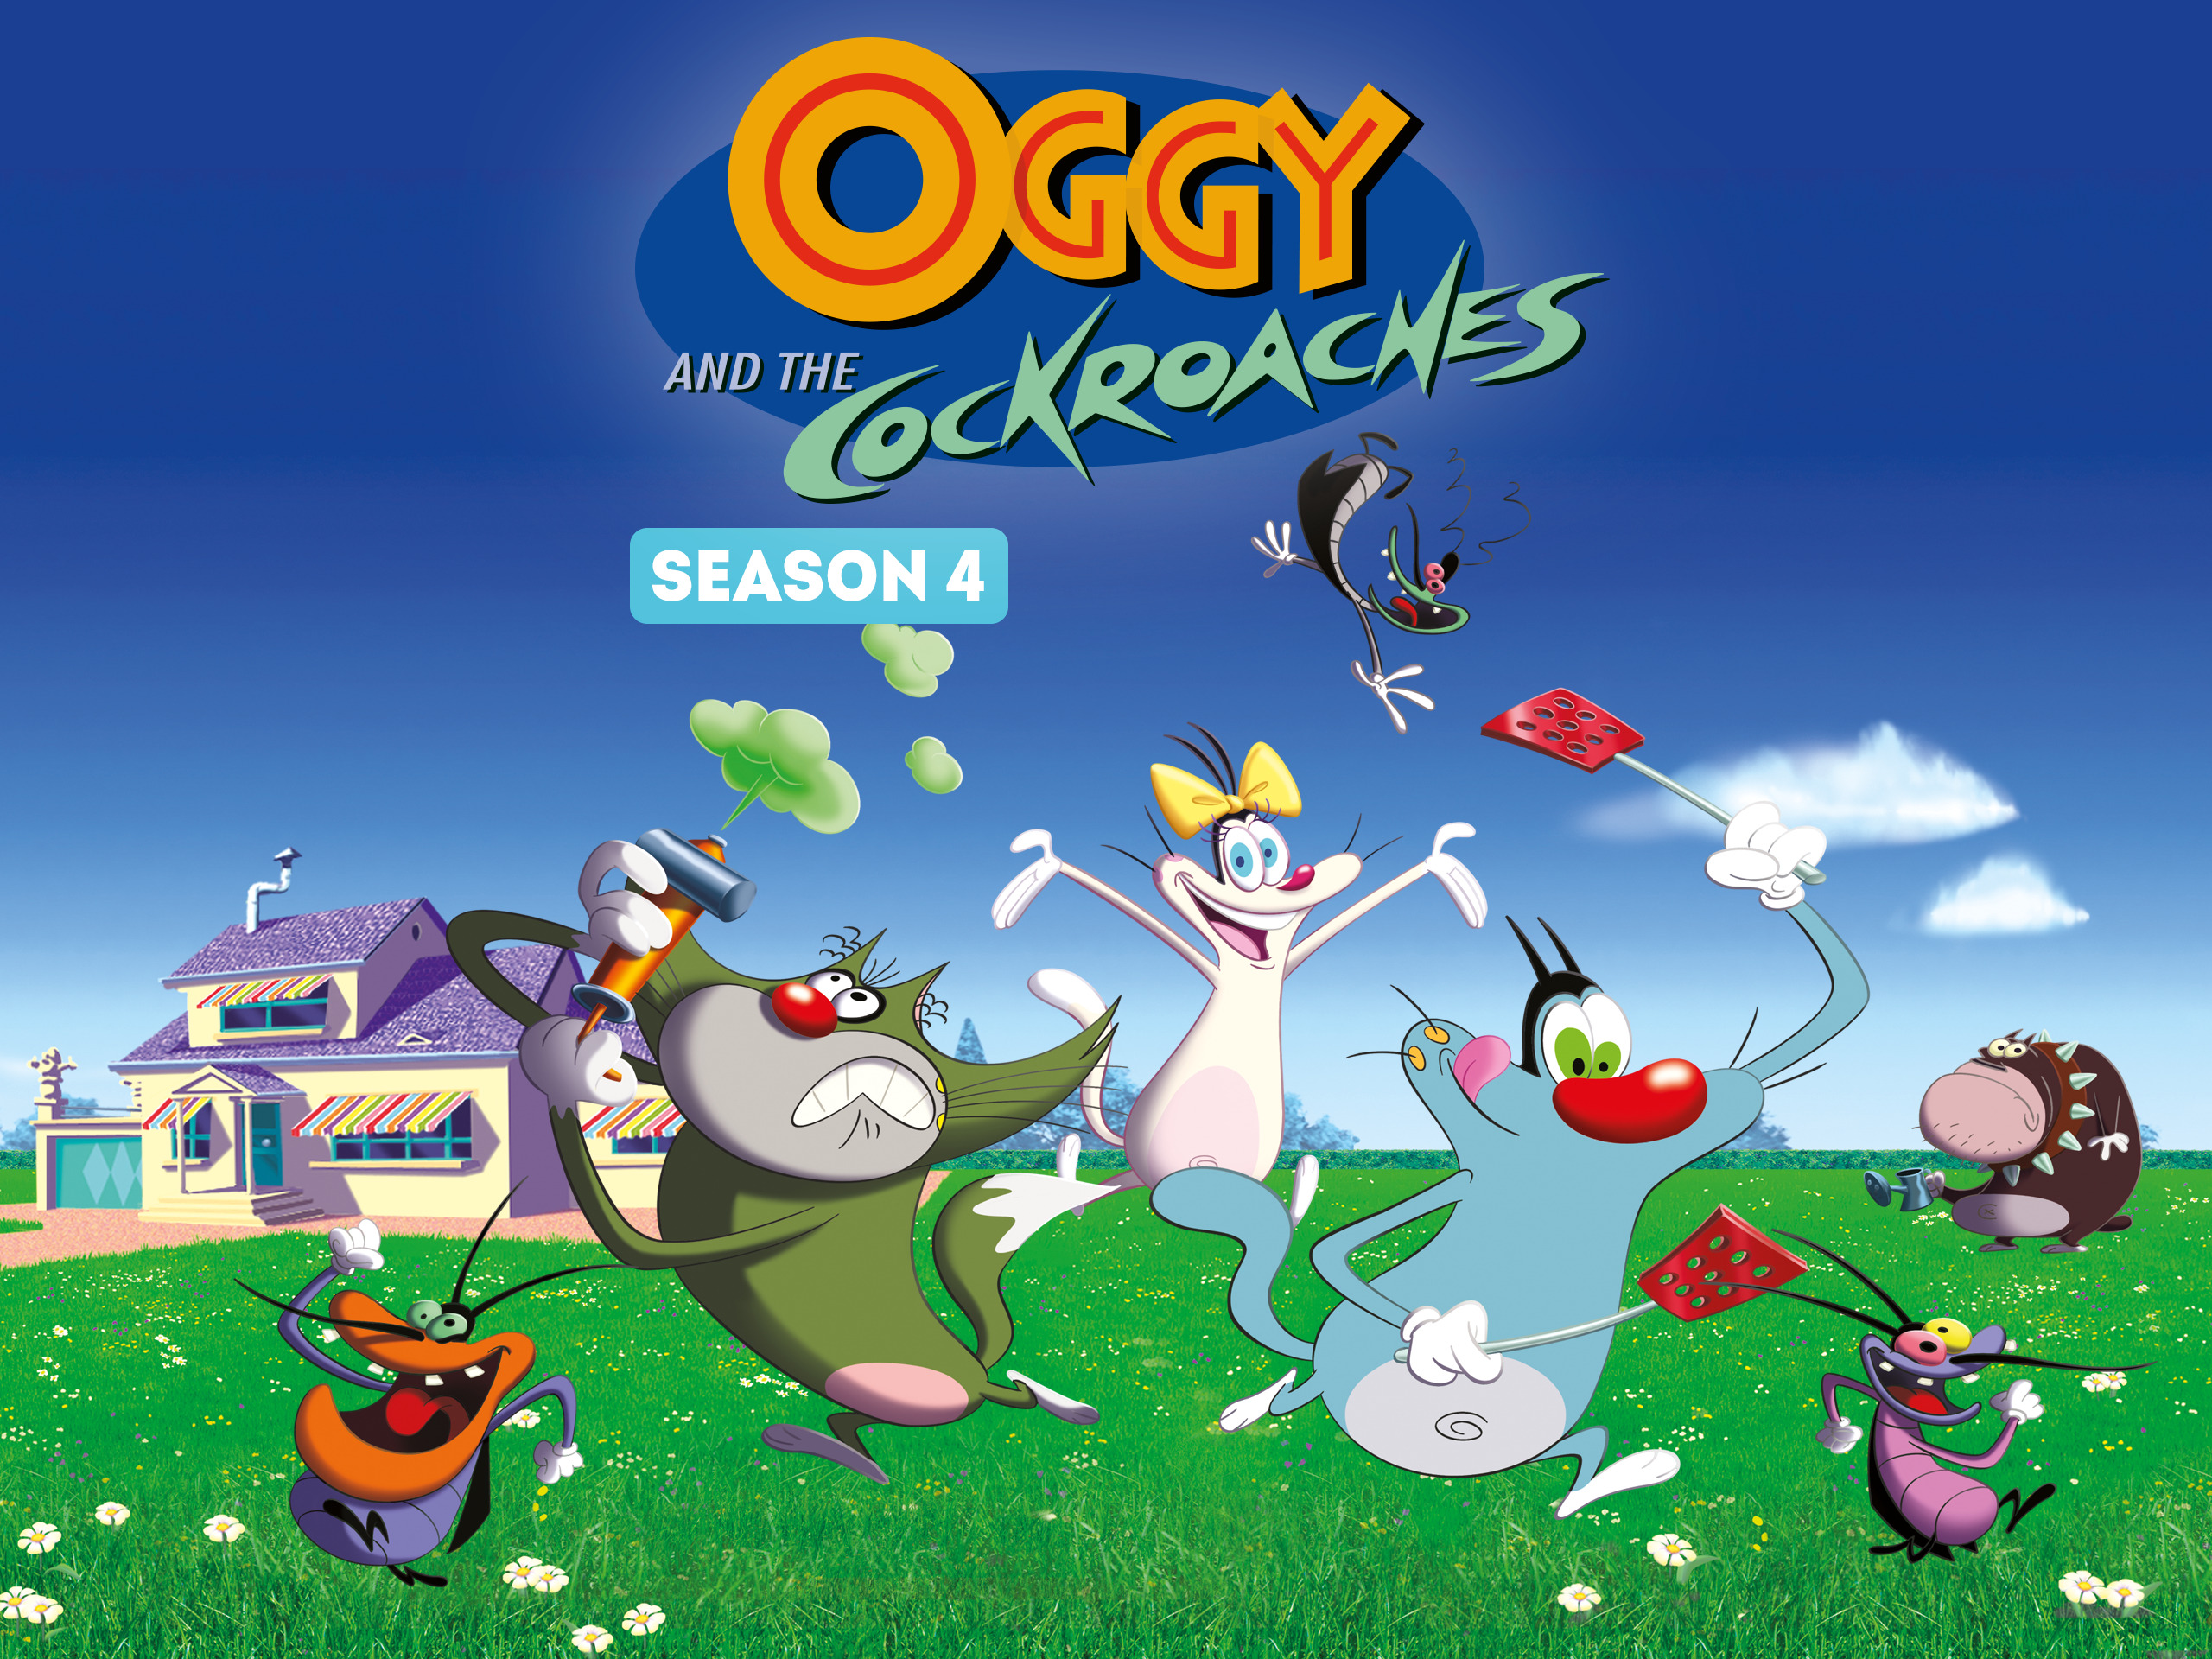 oggy and the cockroaches theme song